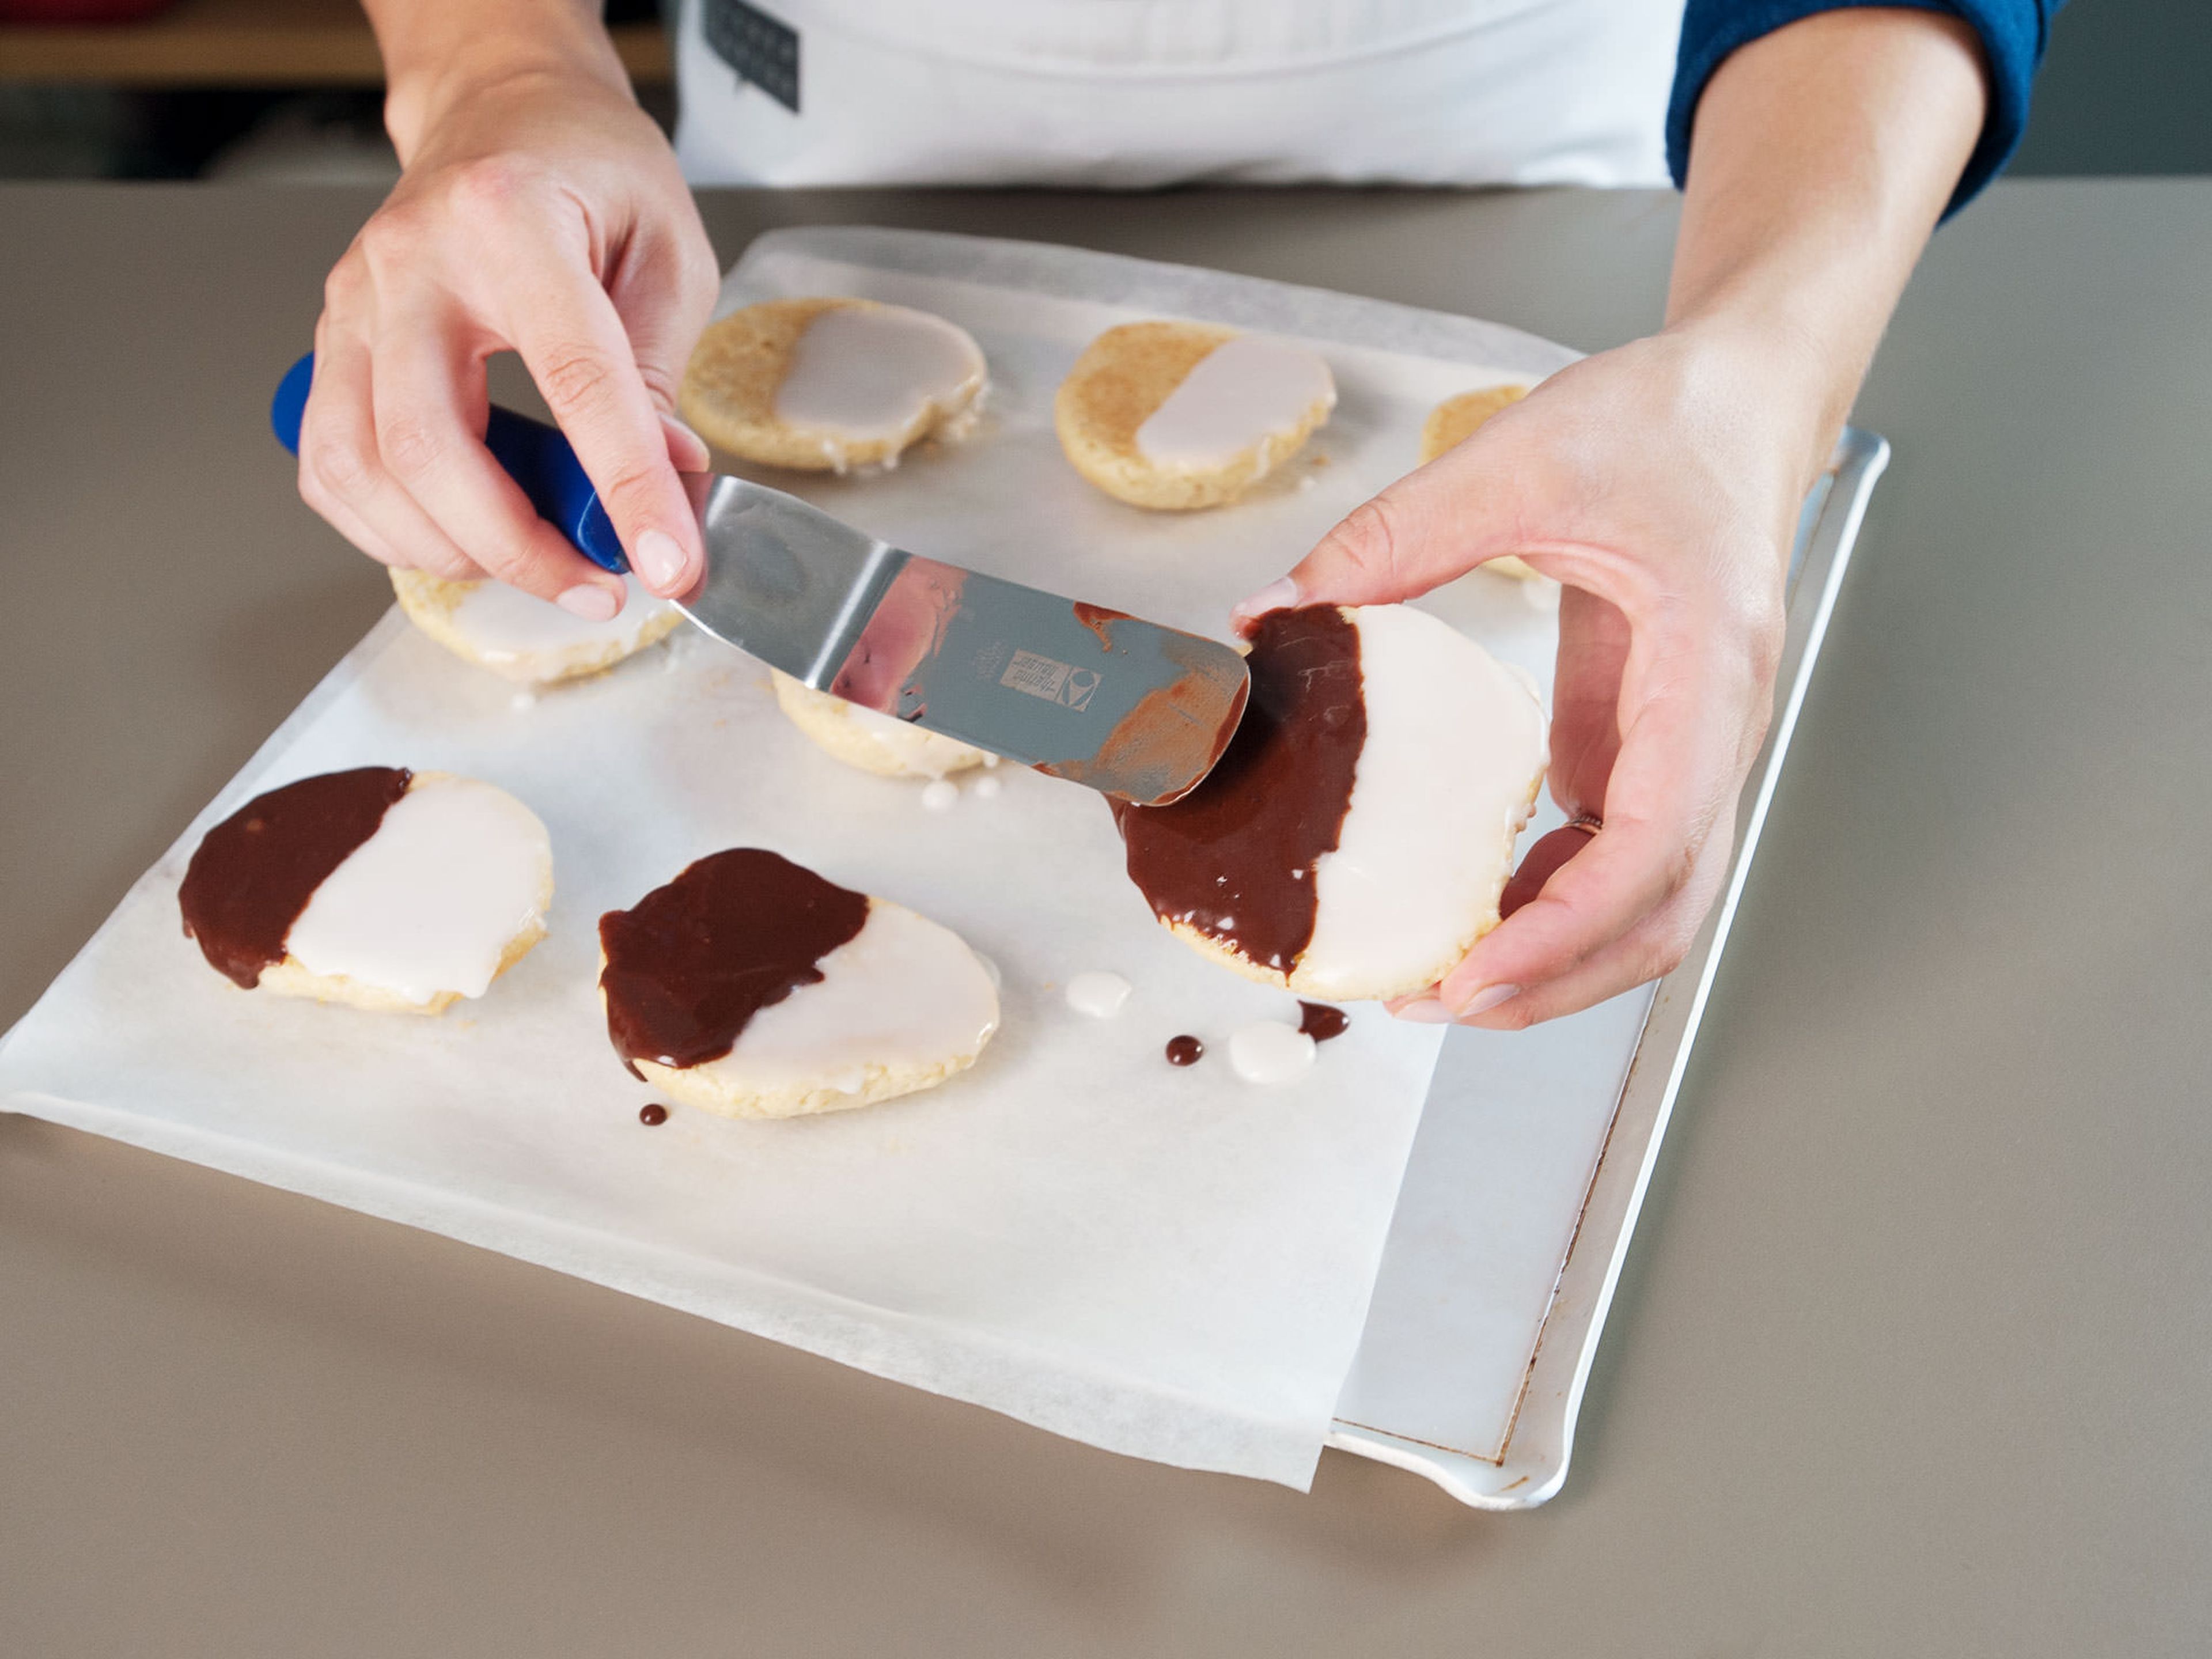 Spread white icing over half of the flat side of each cookie with an offset spatula, then, set aside until icing firms up. Frost the second half with chocolate icing. Enjoy!